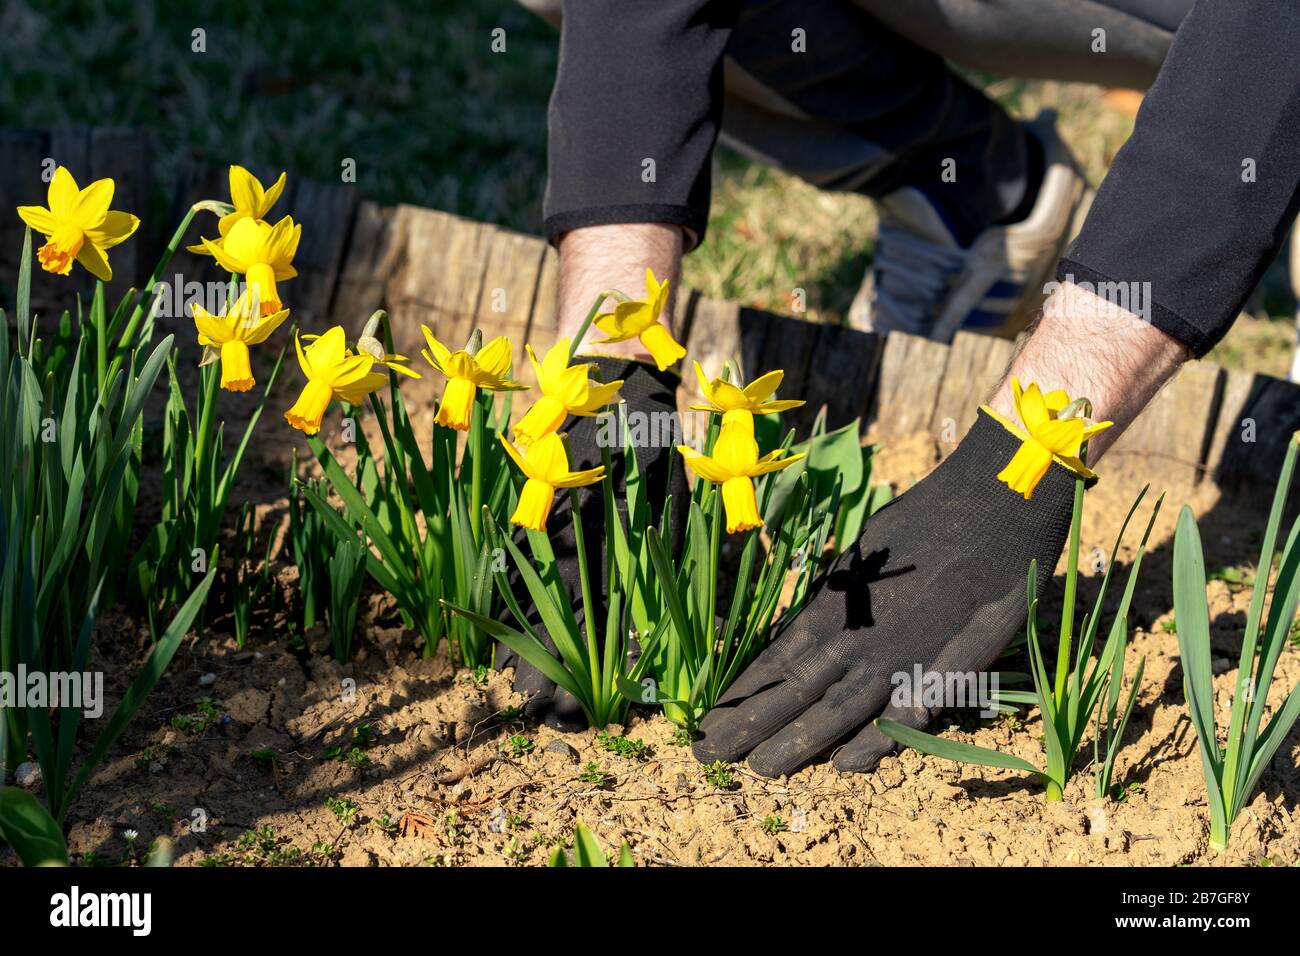 hands of man who is doing some garden care seating planting daffodil flowers Stock Photo